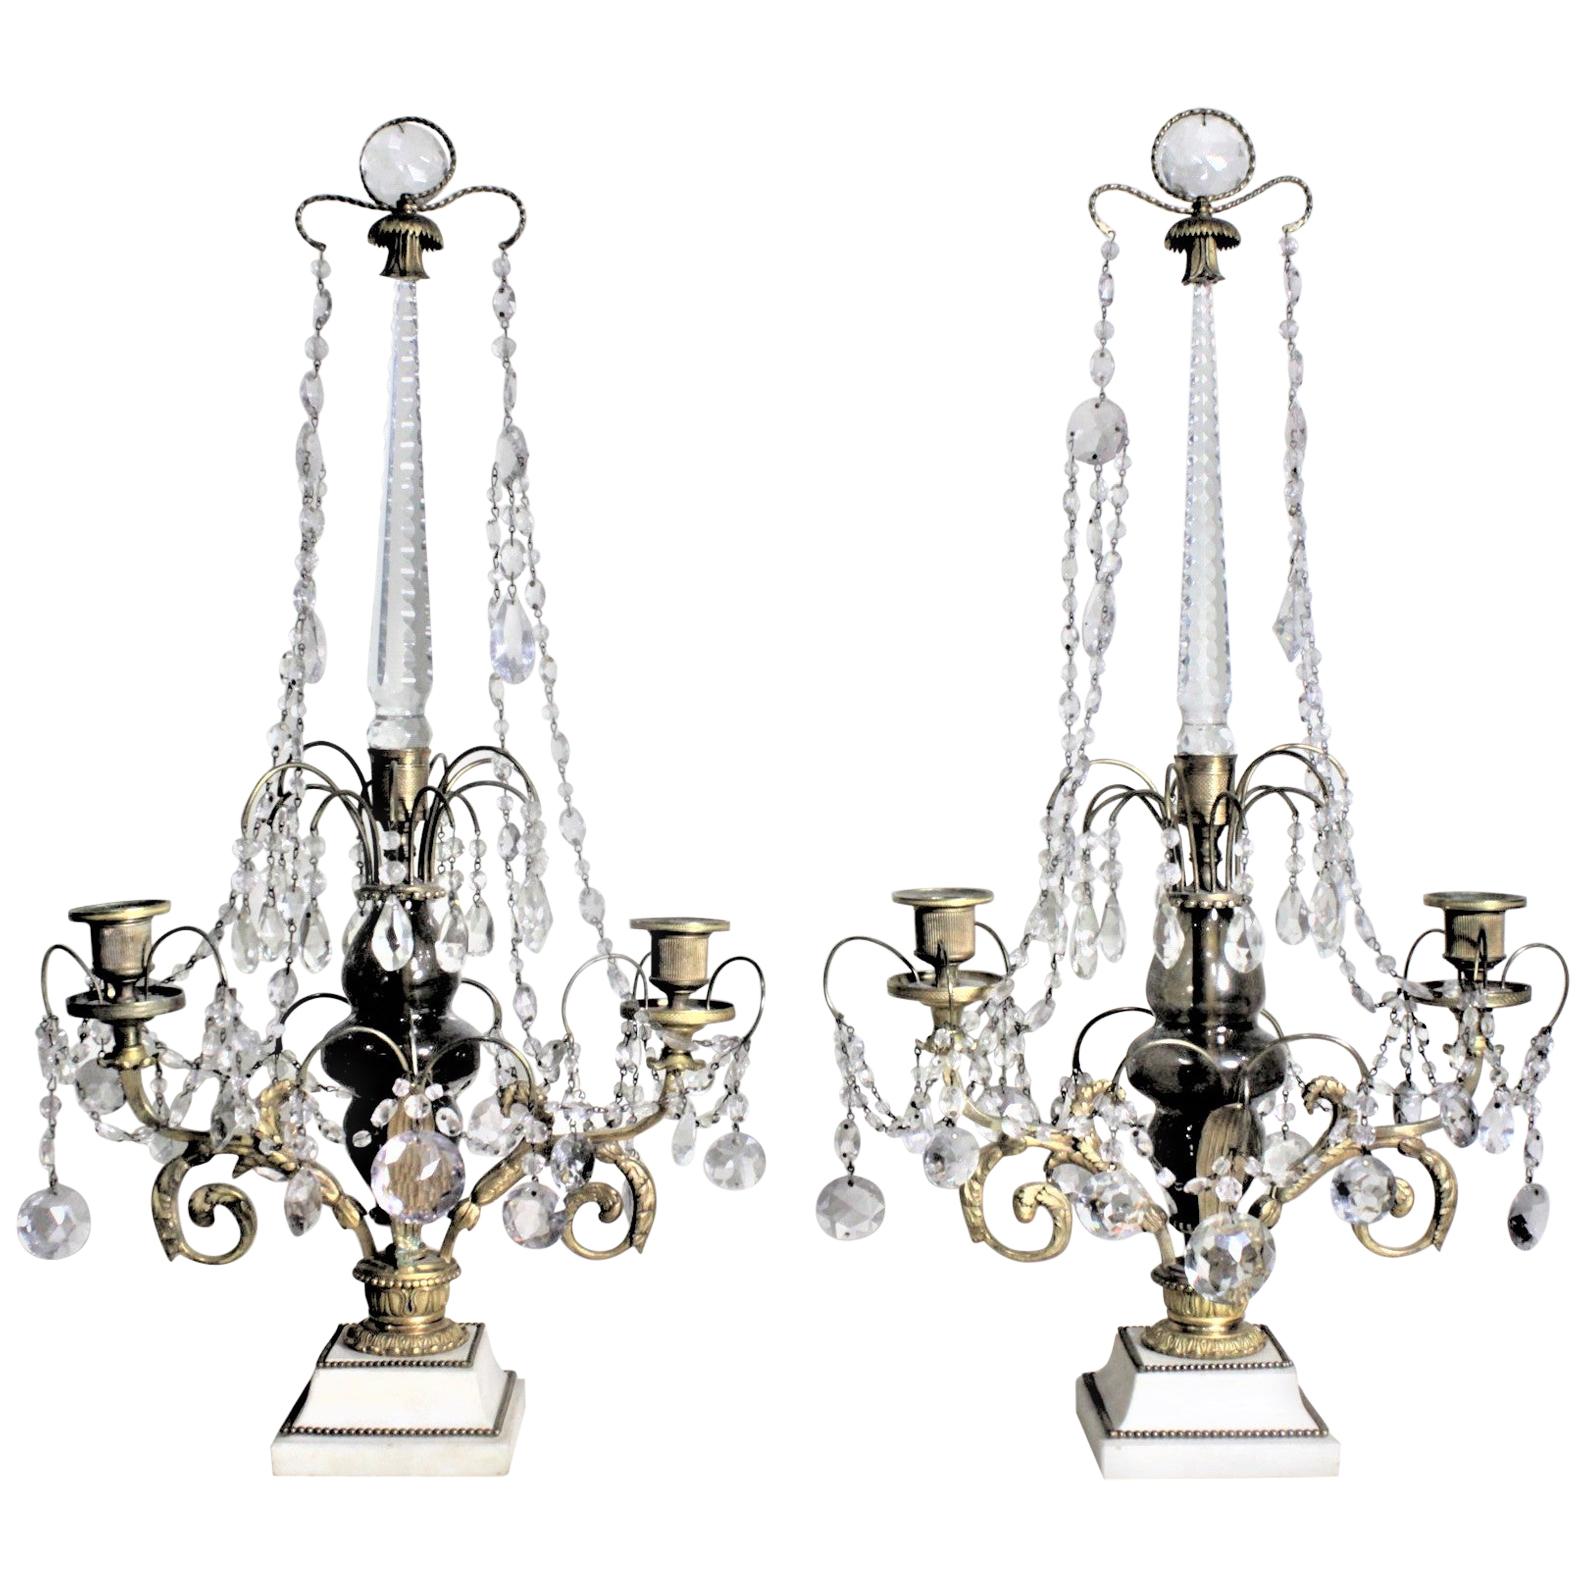 Pair of Antique Elaborate Gilt Bronze and Crystal Candelabras or Candleholders For Sale